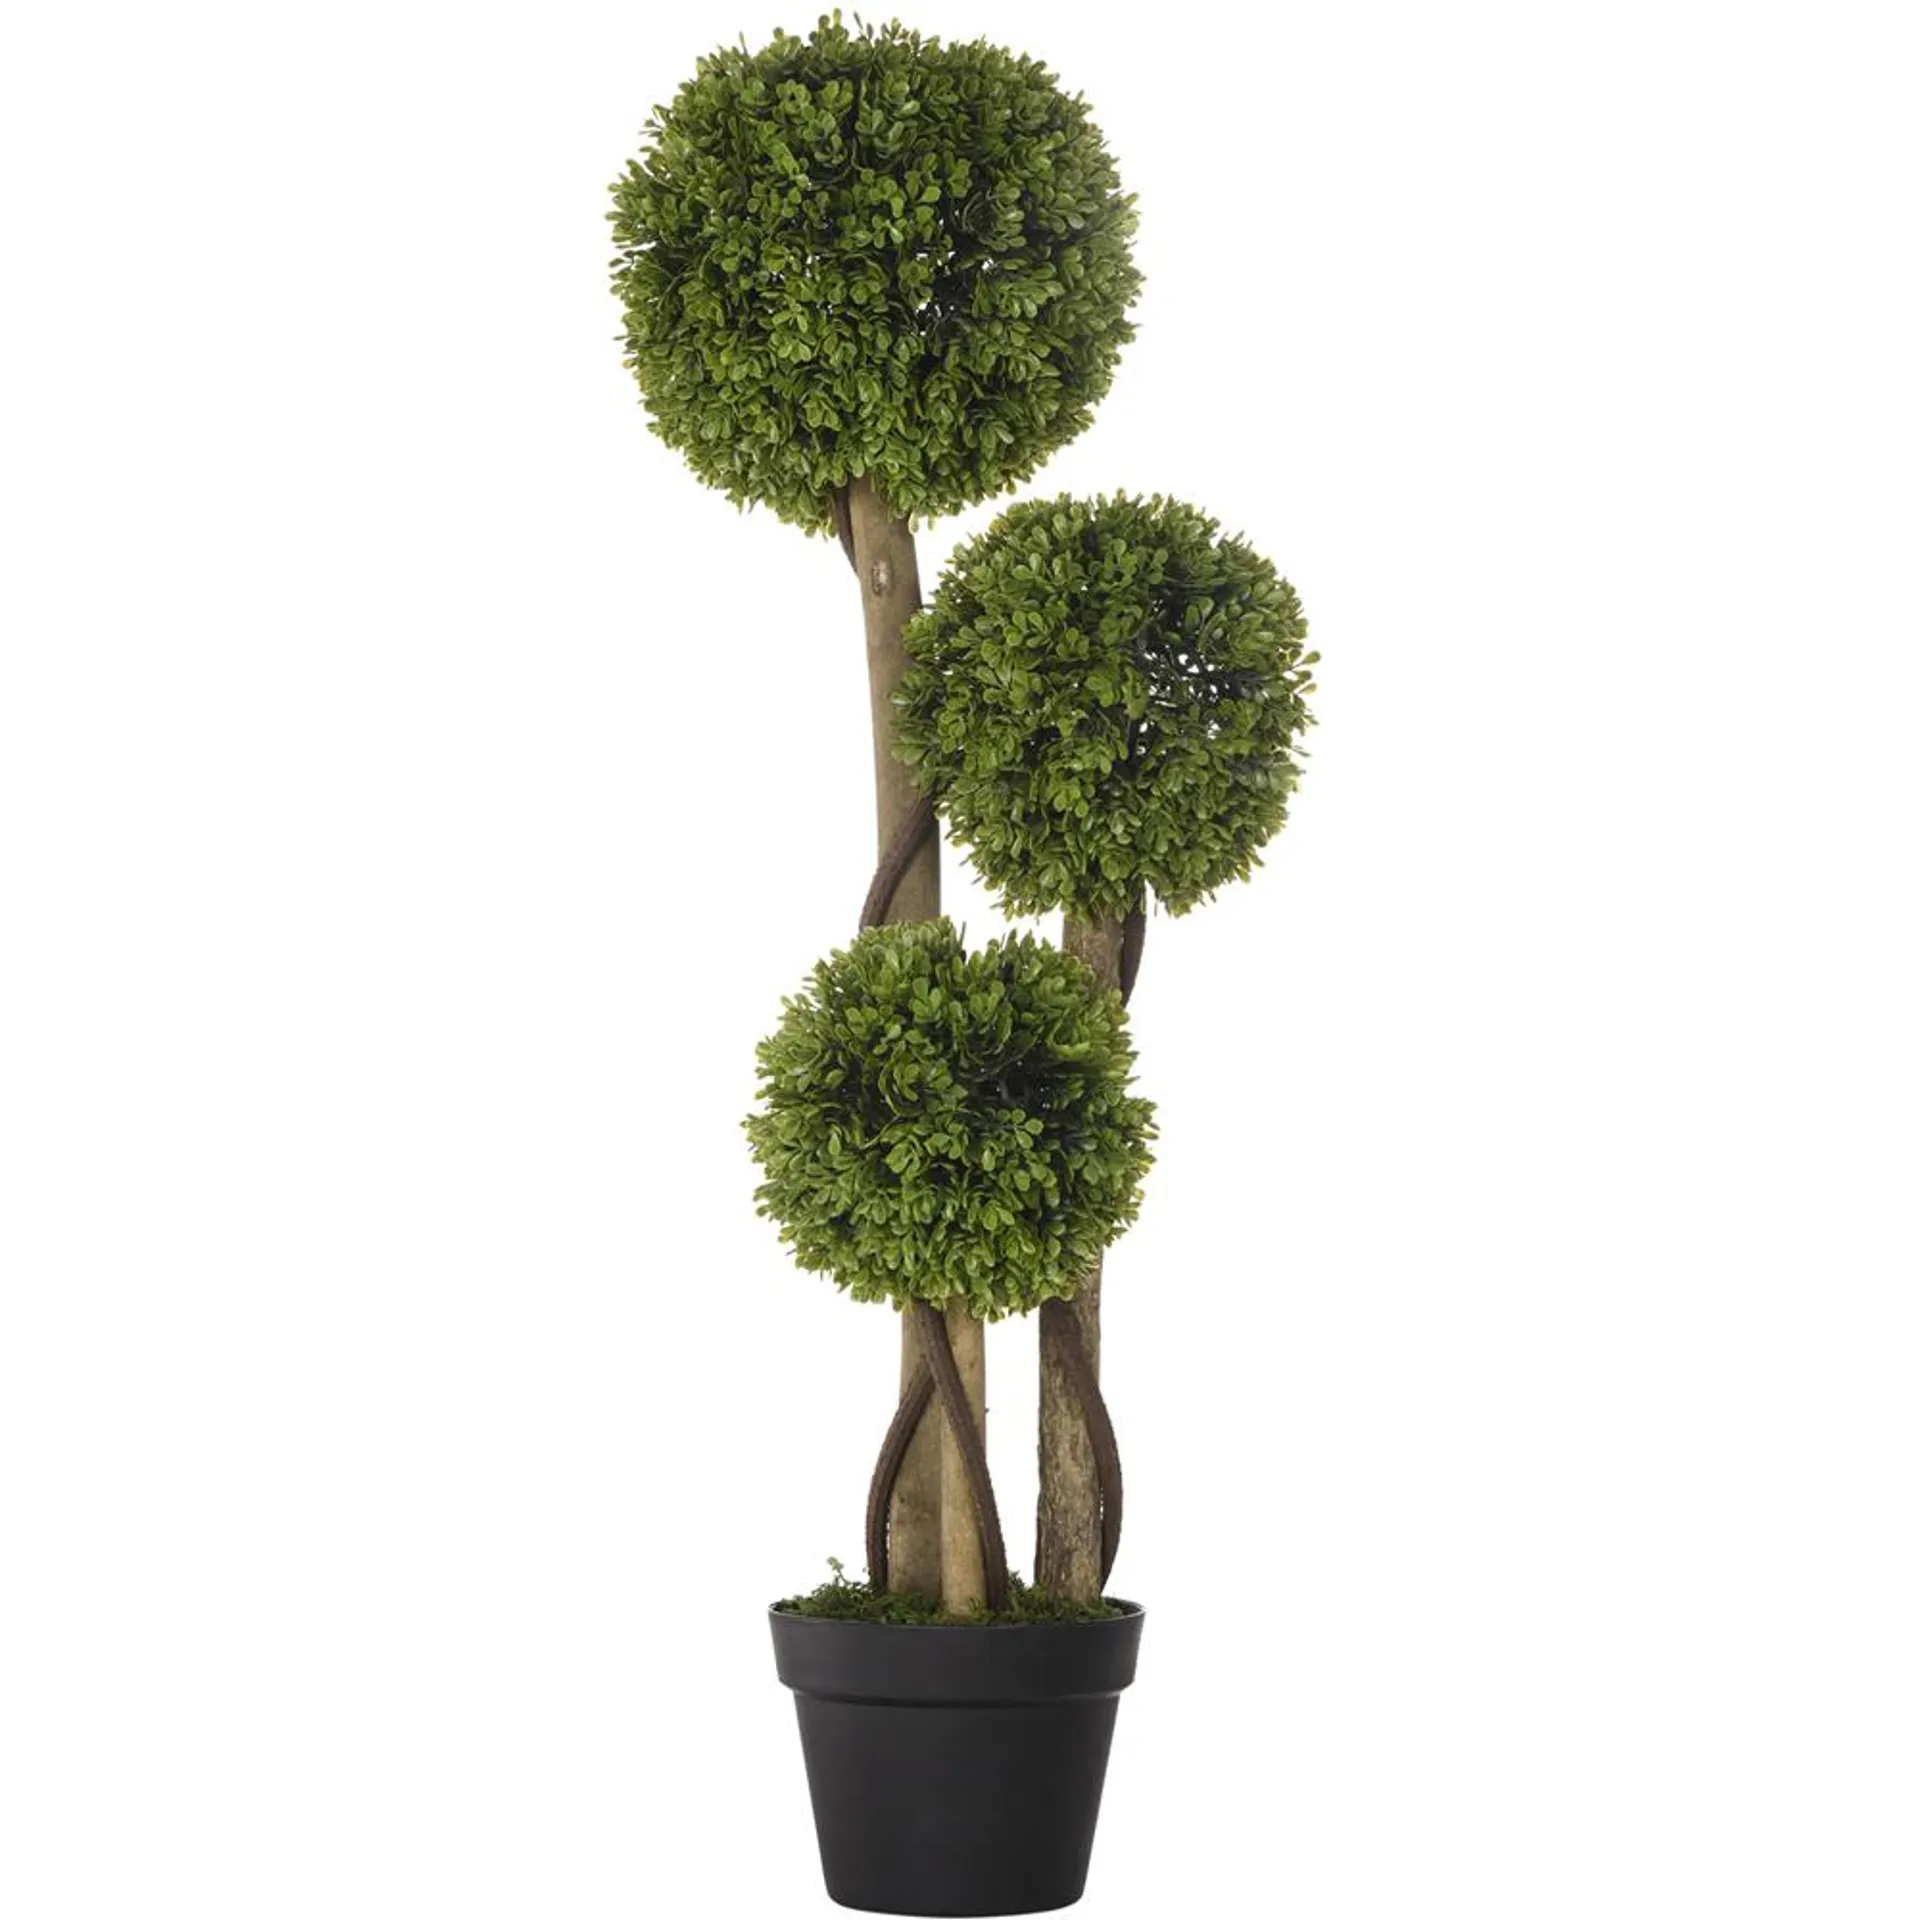 Portland Boxwood Ball Tree Artificial Plant In Pot 3ft